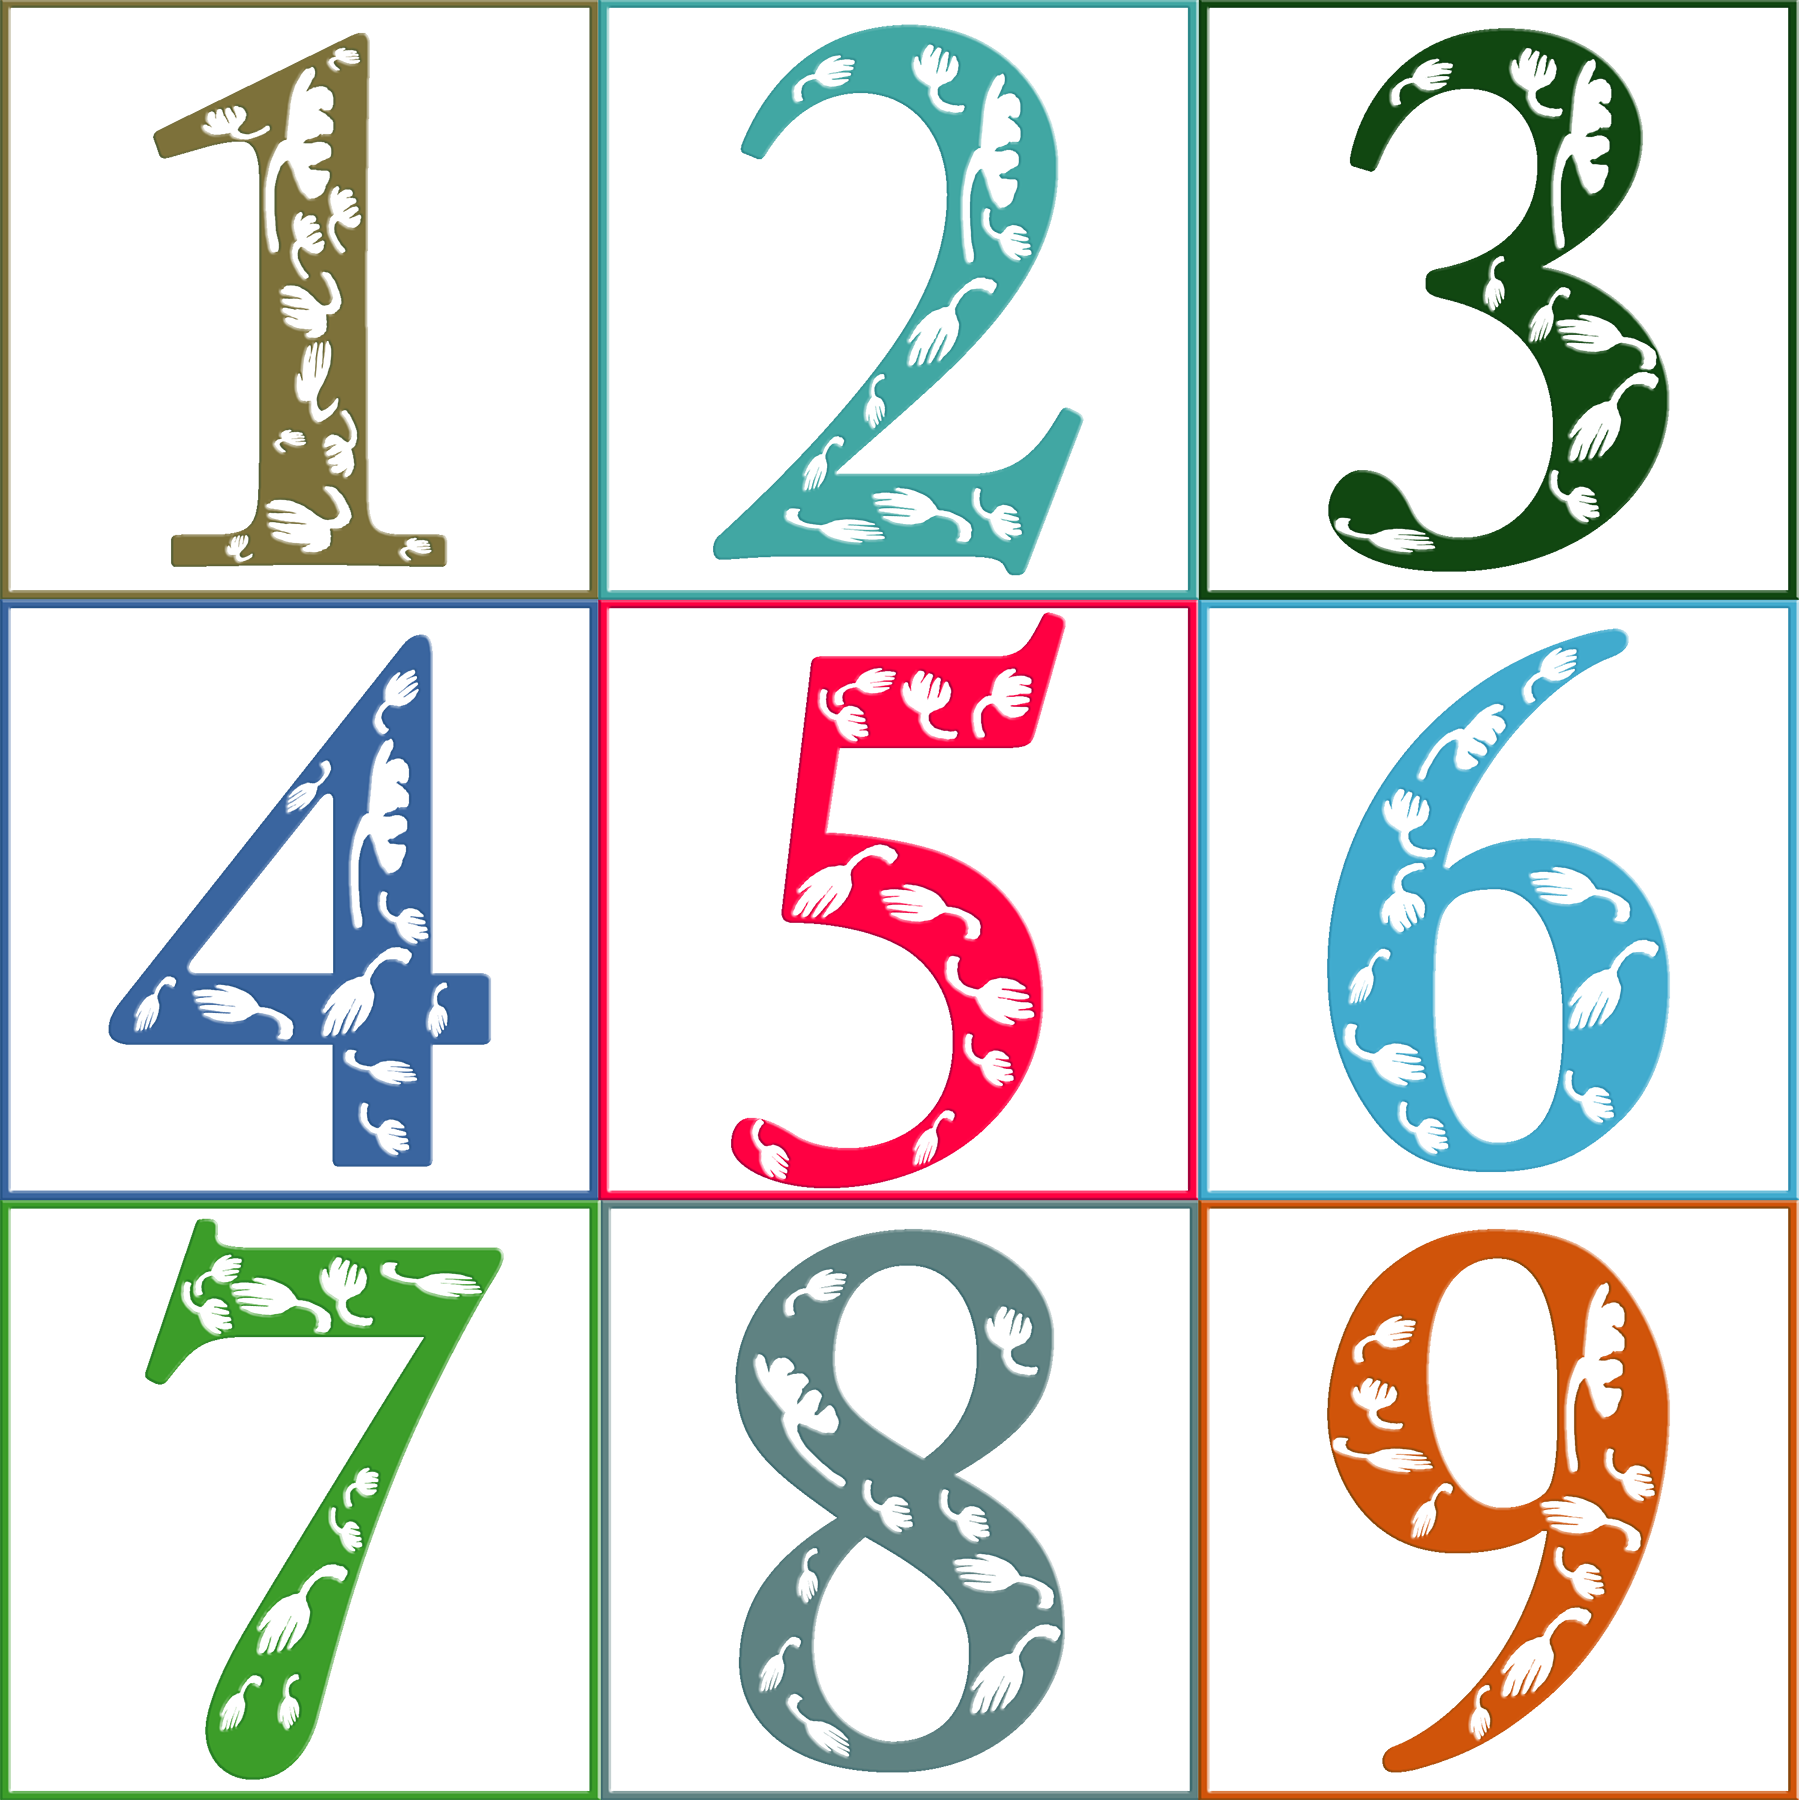 Numerology | Numerological number